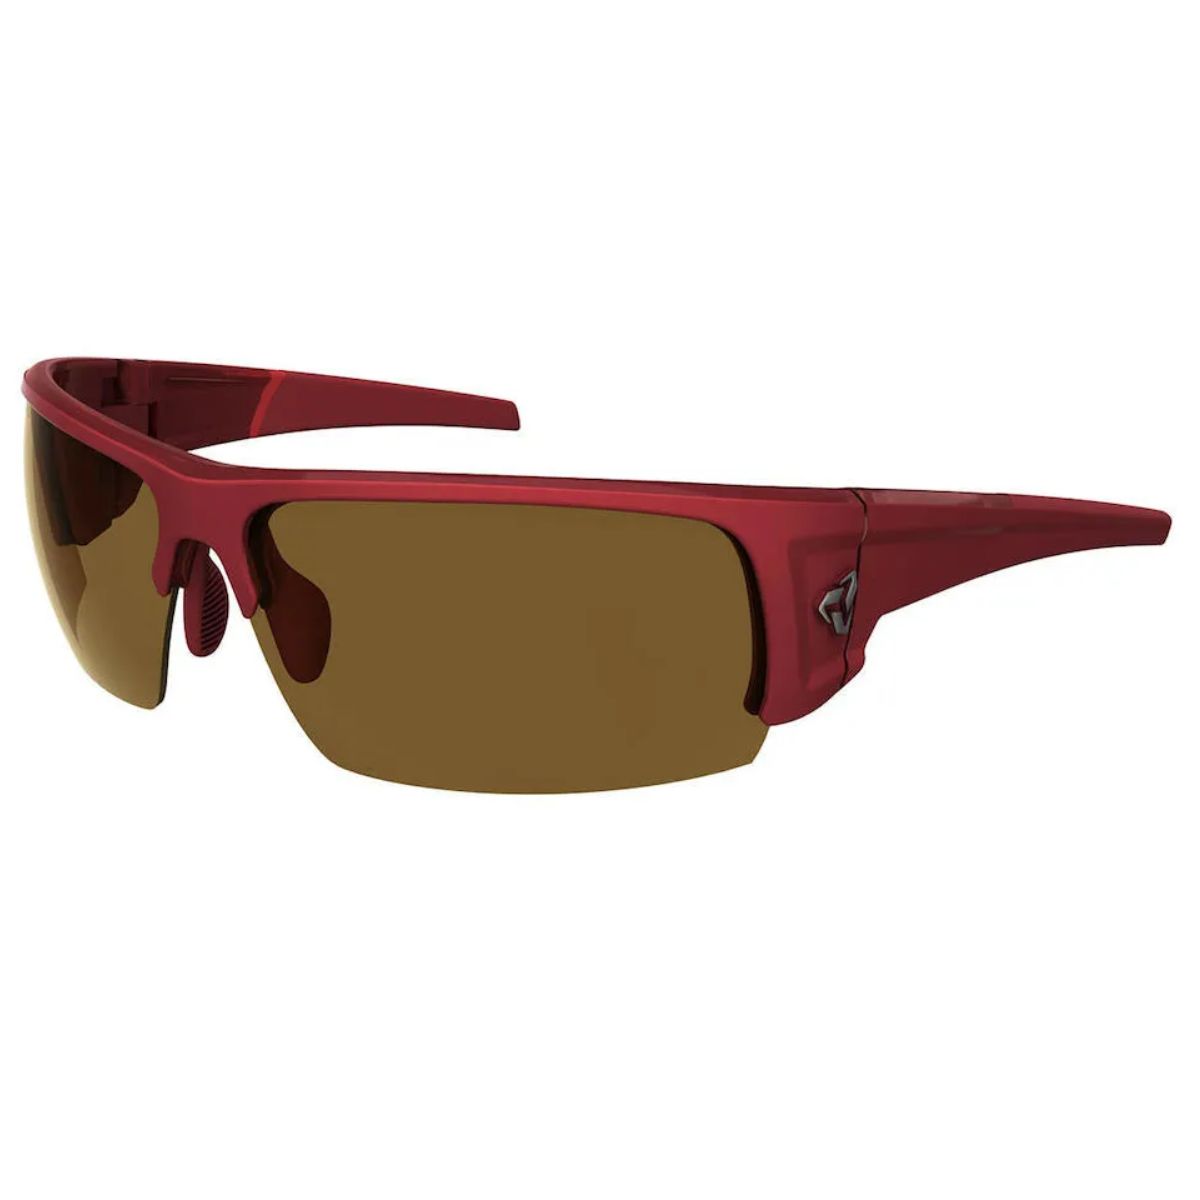 Lunette Ryders Caliber poly rouge/brun